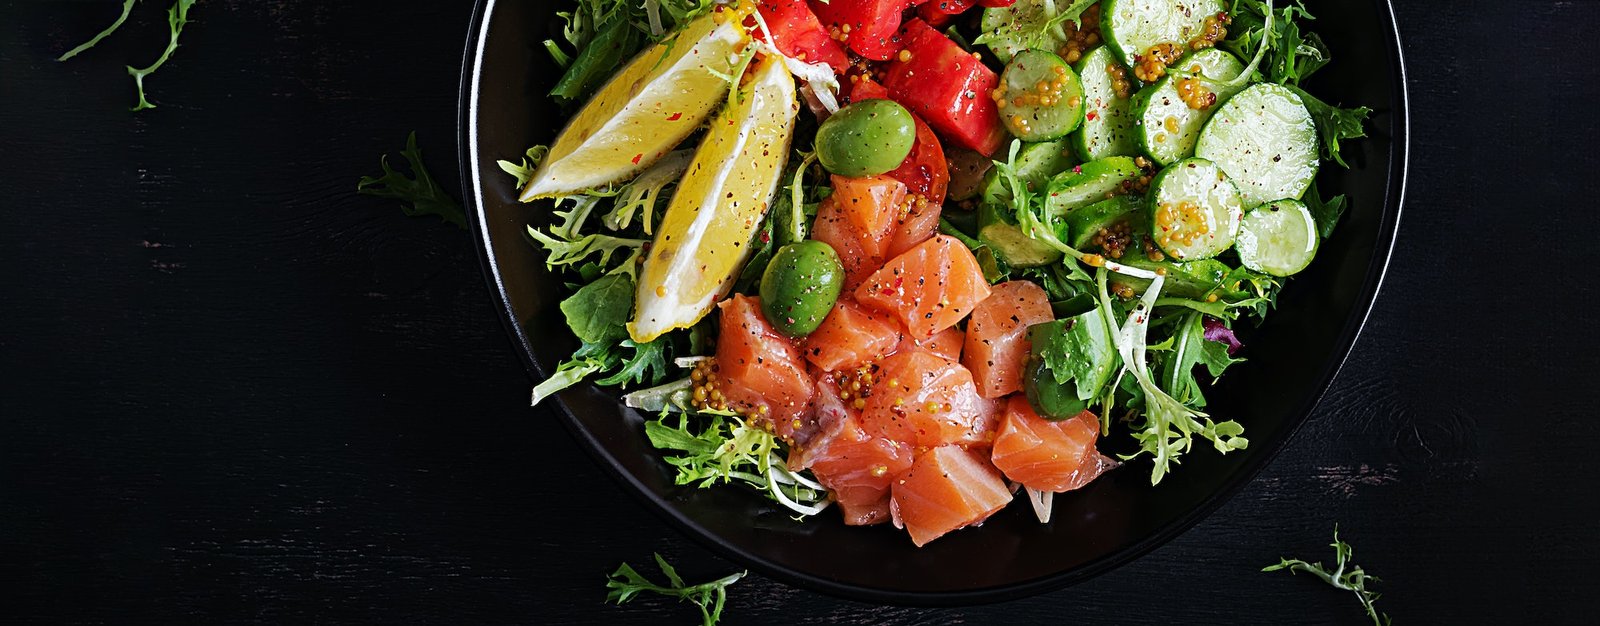 Ketogenic, keto or paleo diet lunch bowl with salted salmon fish